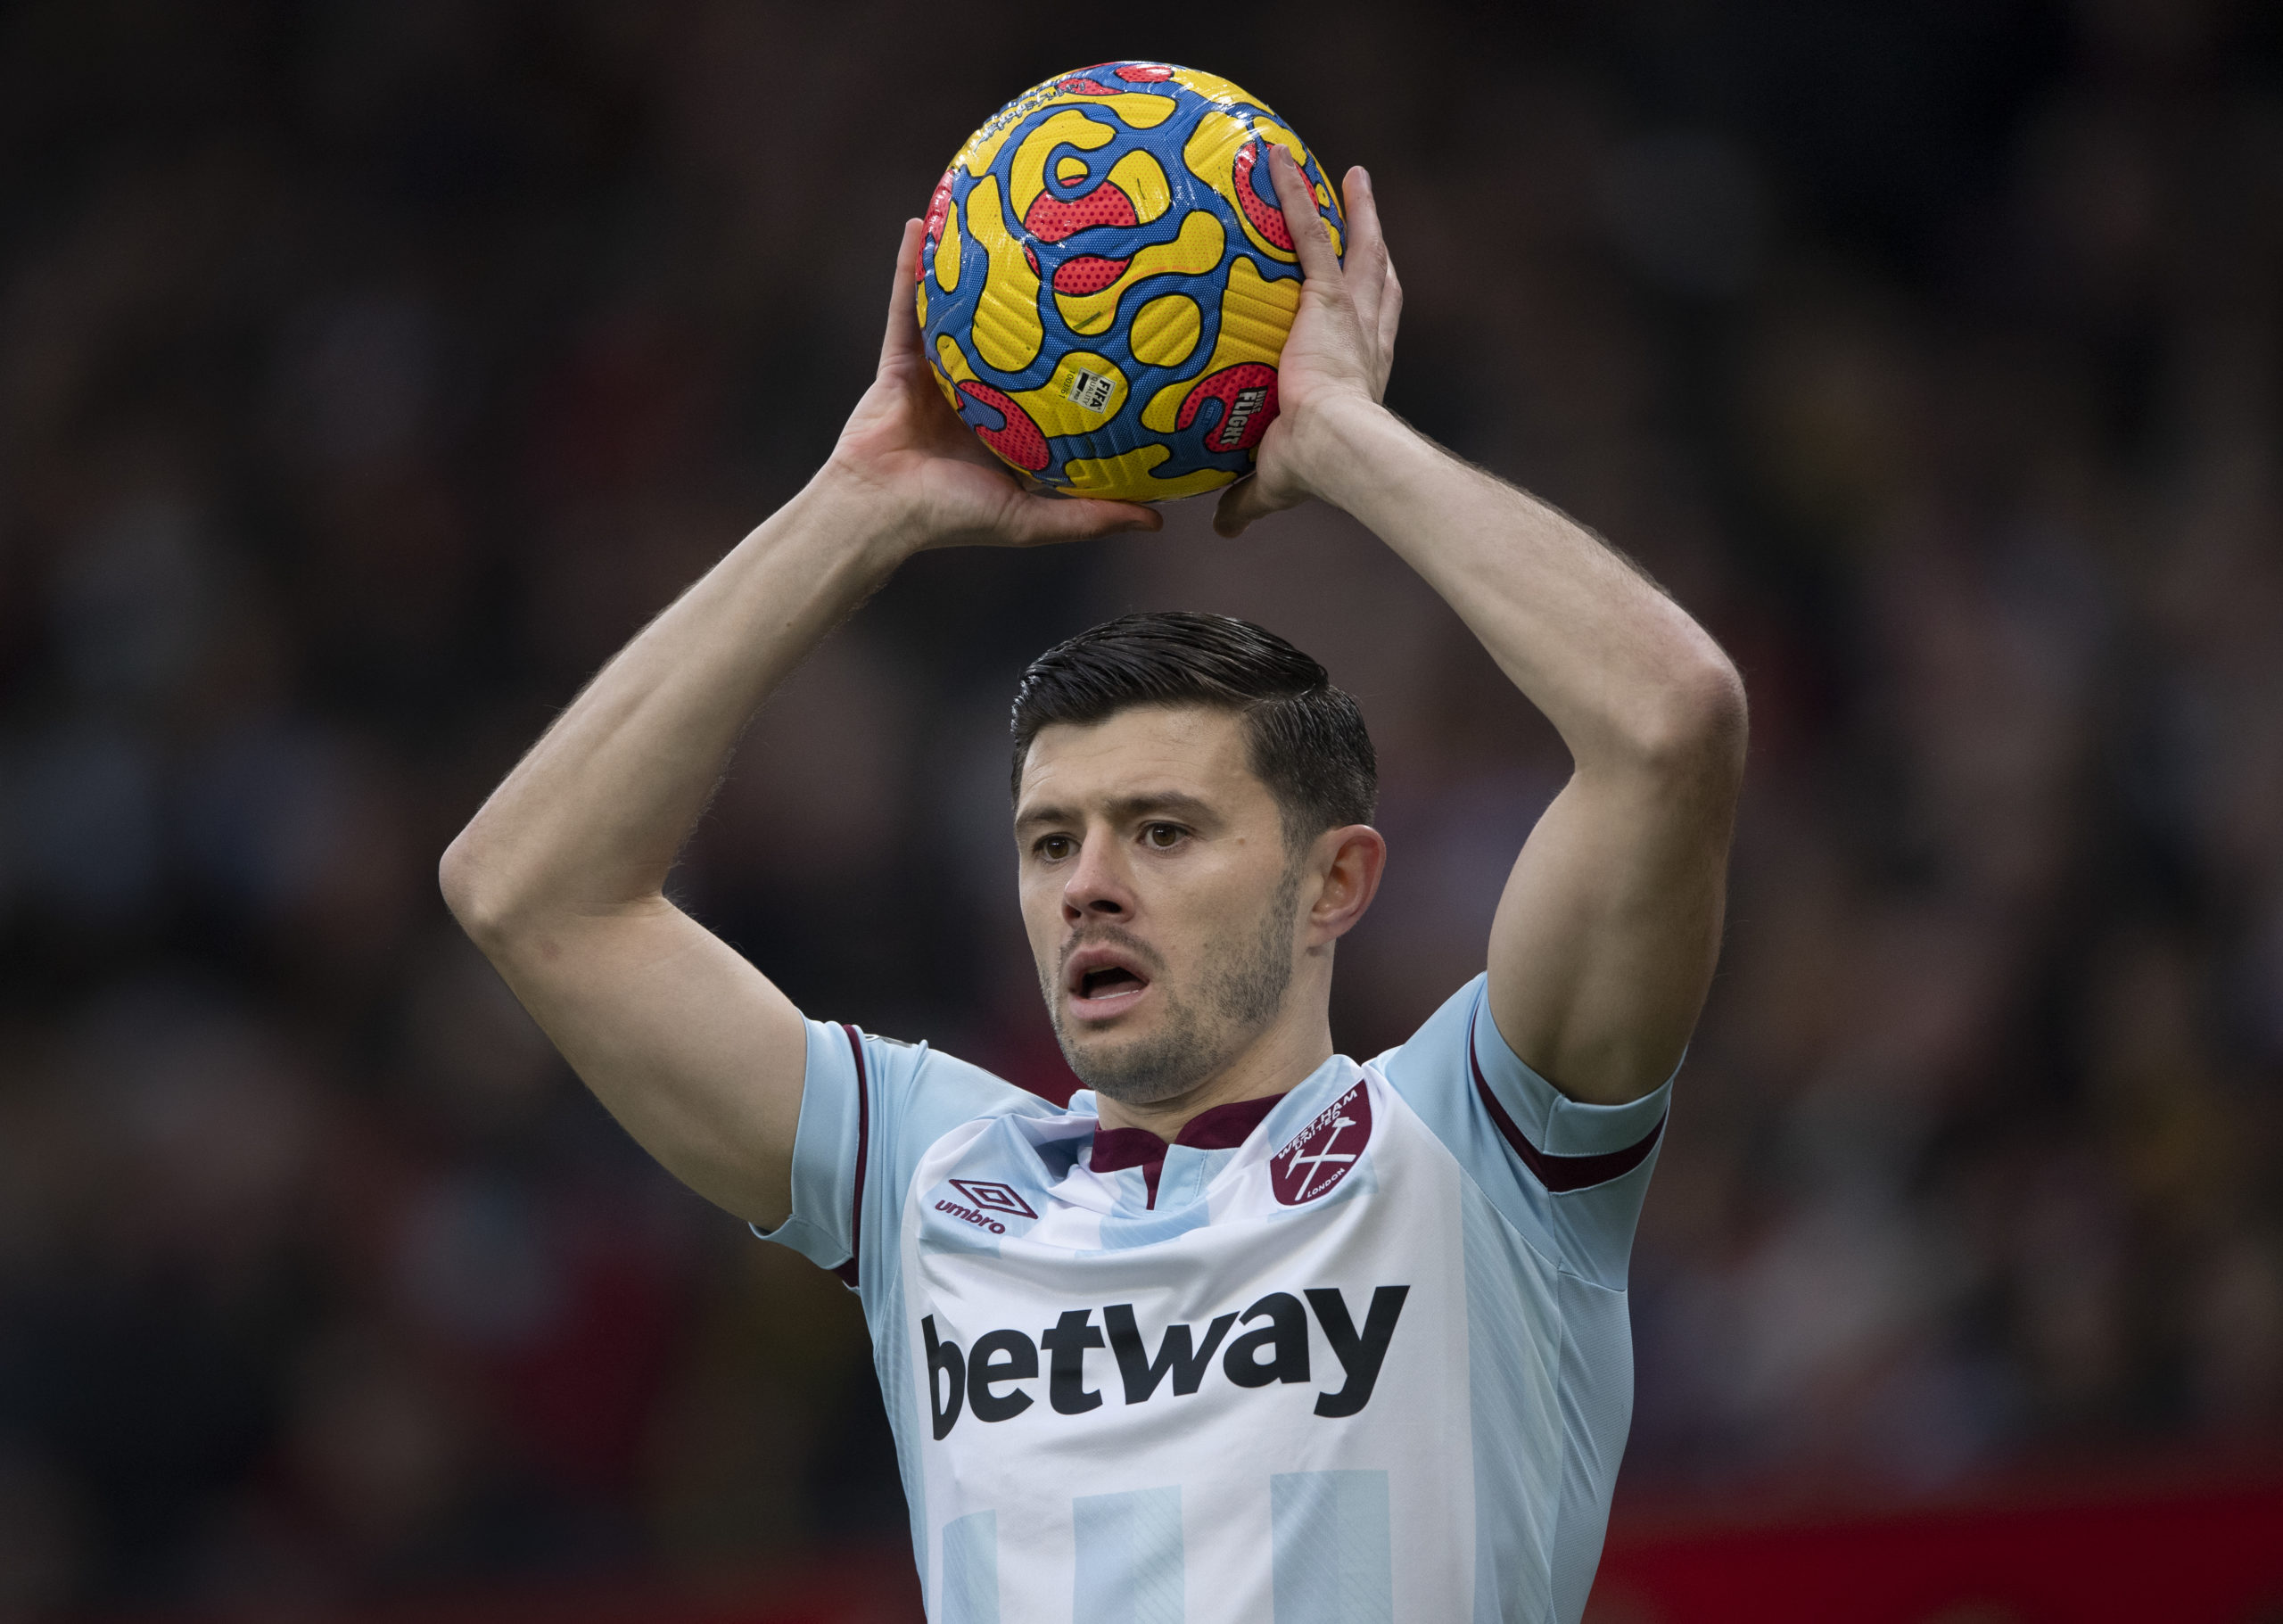 West Ham United defender Aaron Cresswell has absolutely raved about Declan Rice